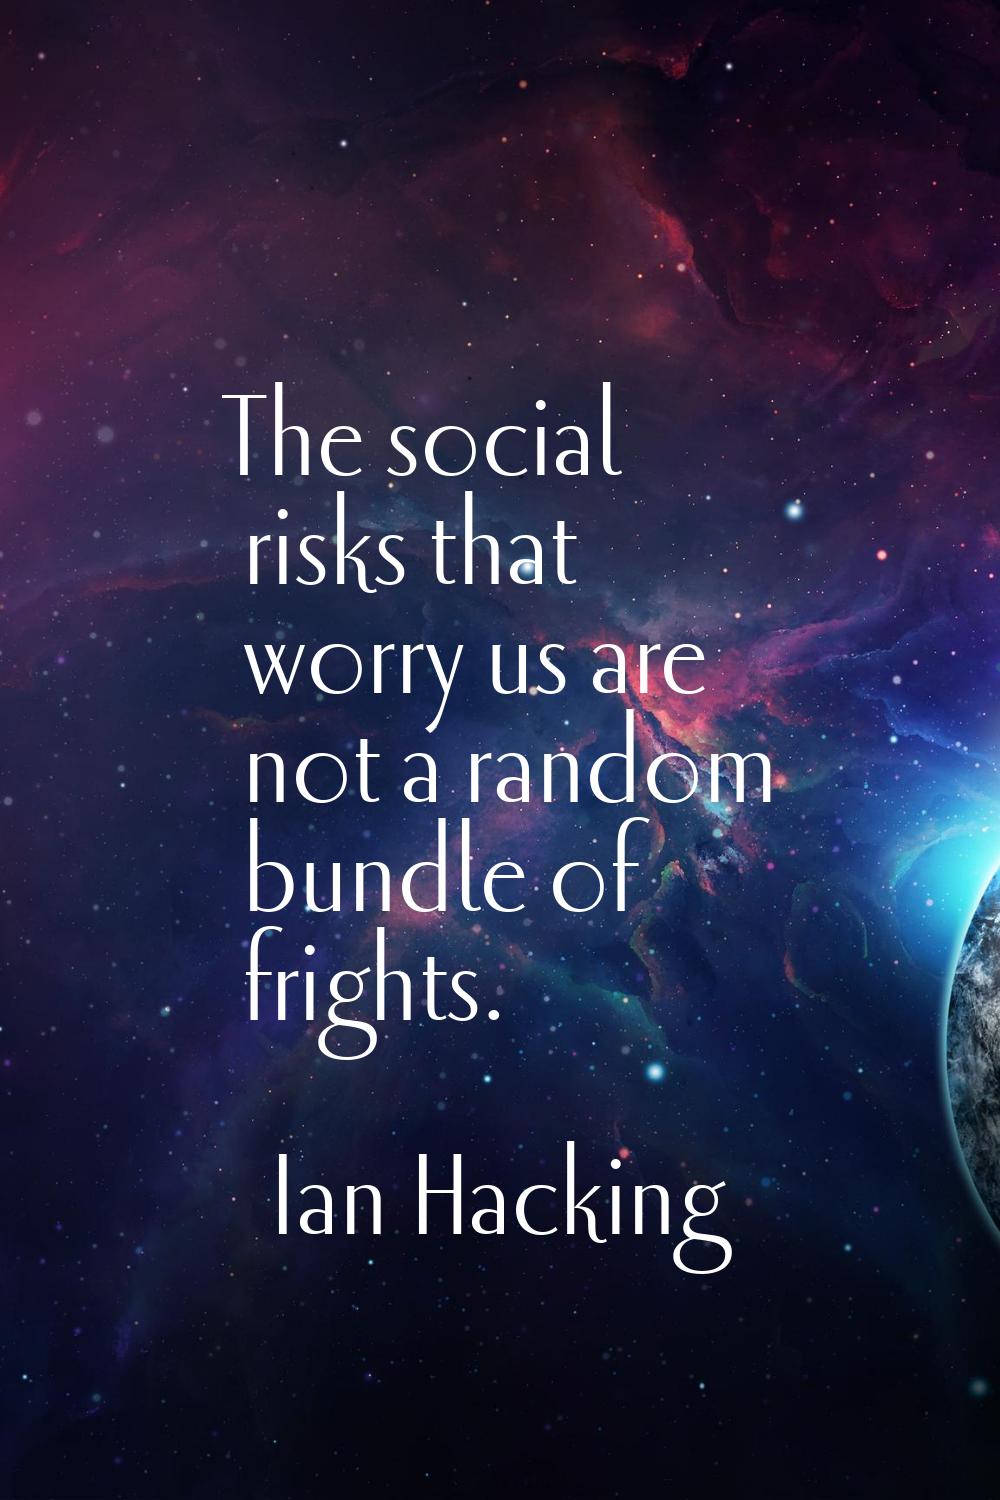 The social risks that worry us are not a random bundle of frights.